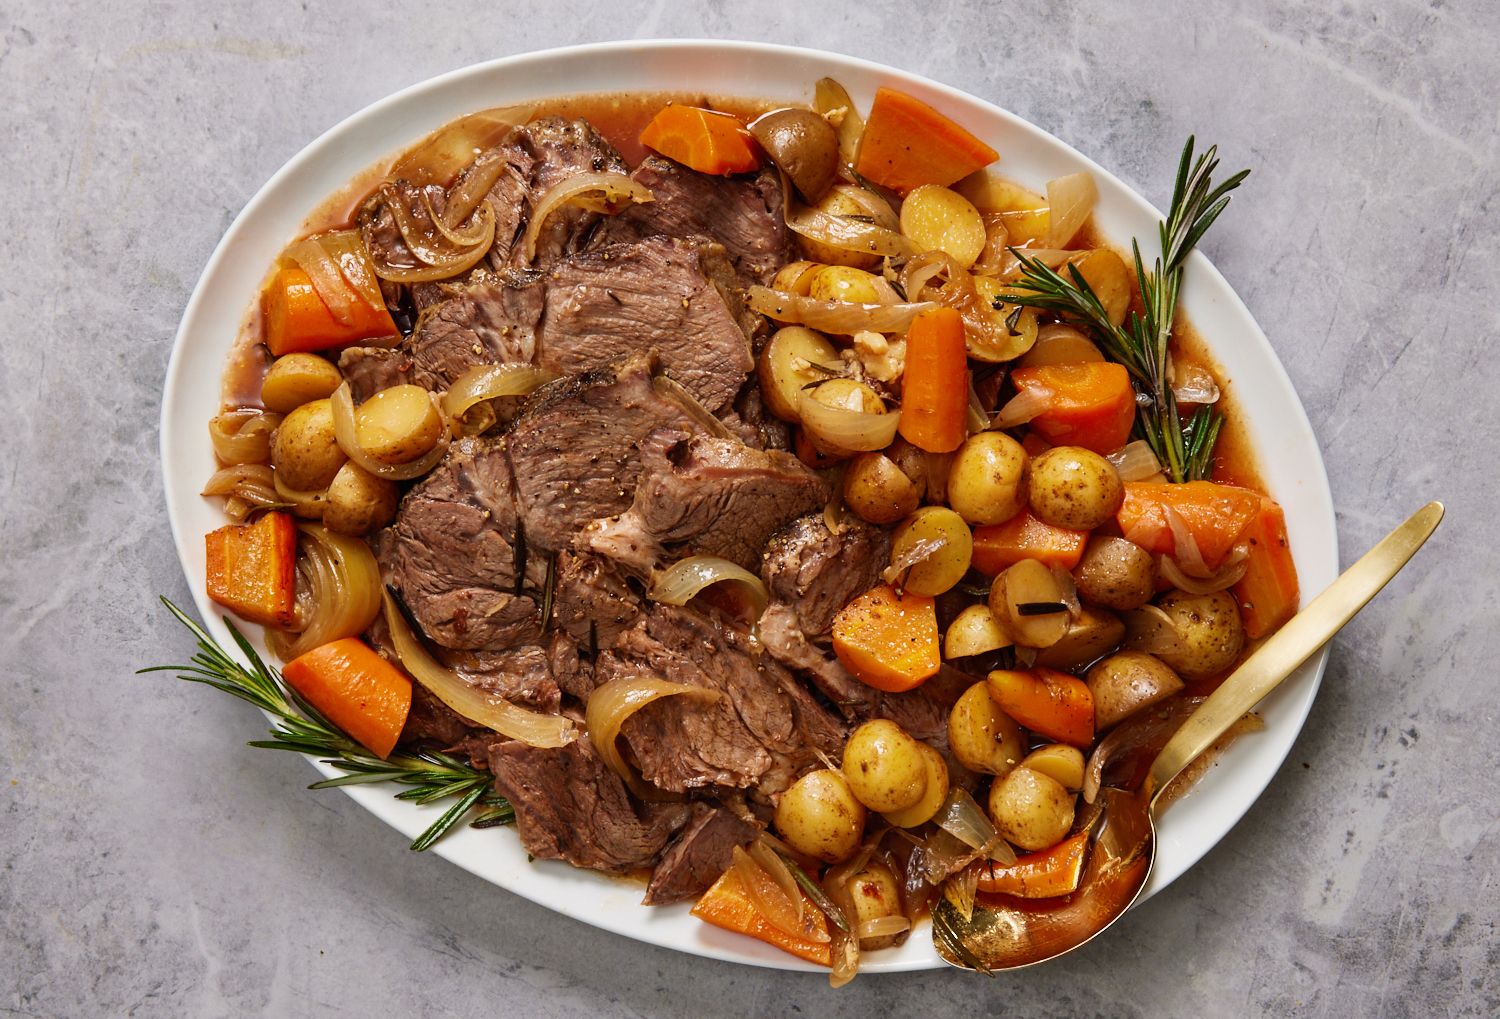 87 Best Slow Cooker Recipes to Make in Your Crock Pot®